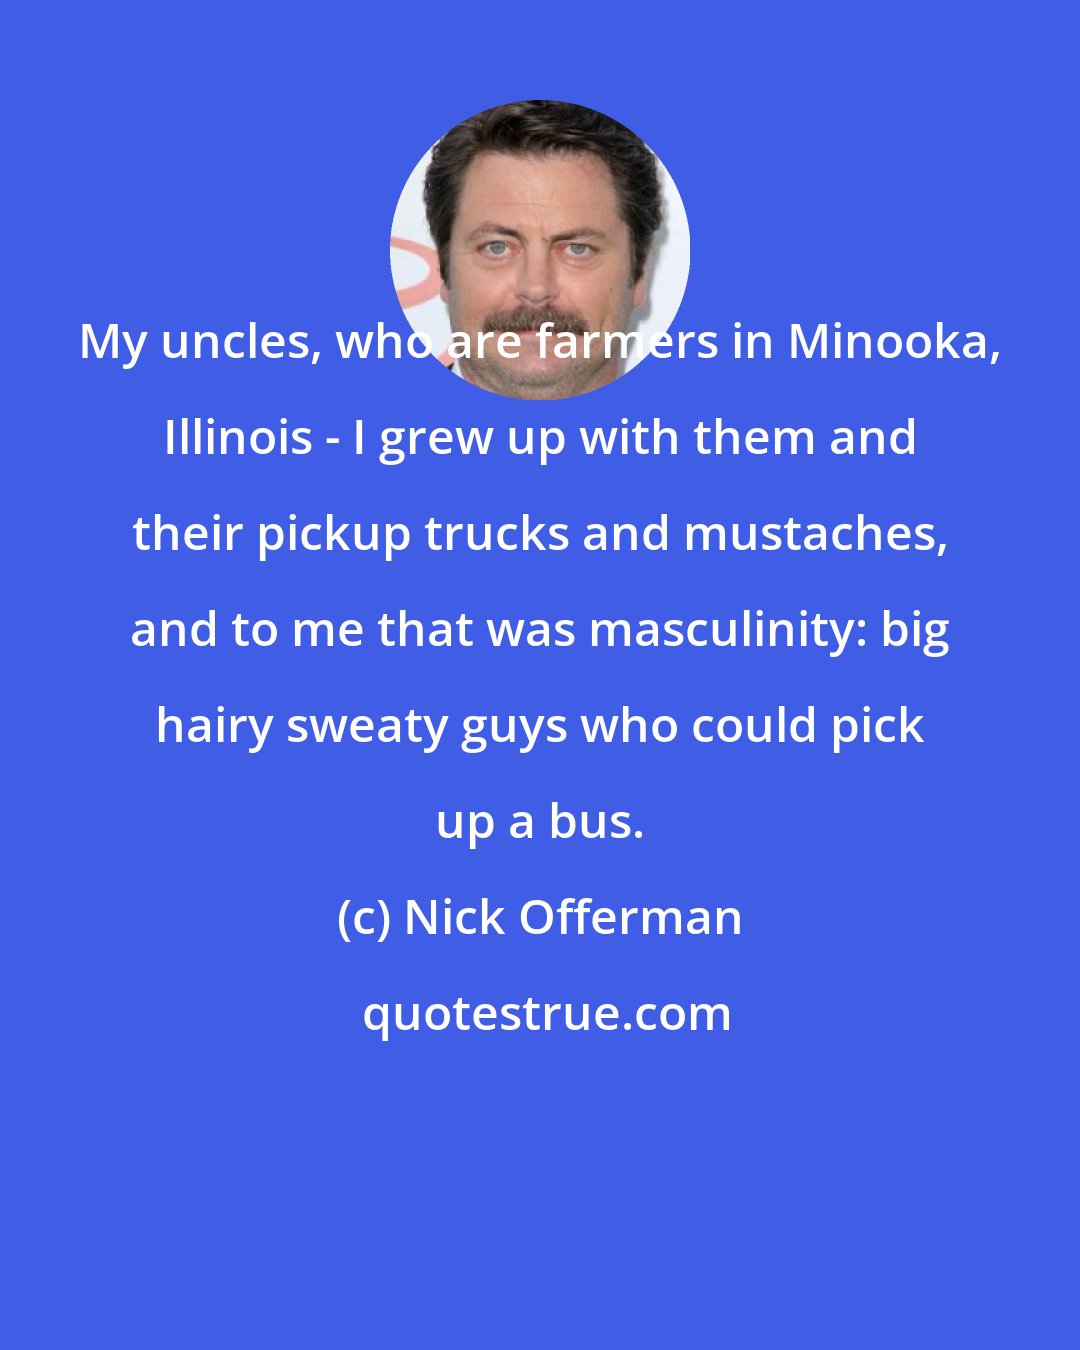 Nick Offerman: My uncles, who are farmers in Minooka, Illinois - I grew up with them and their pickup trucks and mustaches, and to me that was masculinity: big hairy sweaty guys who could pick up a bus.